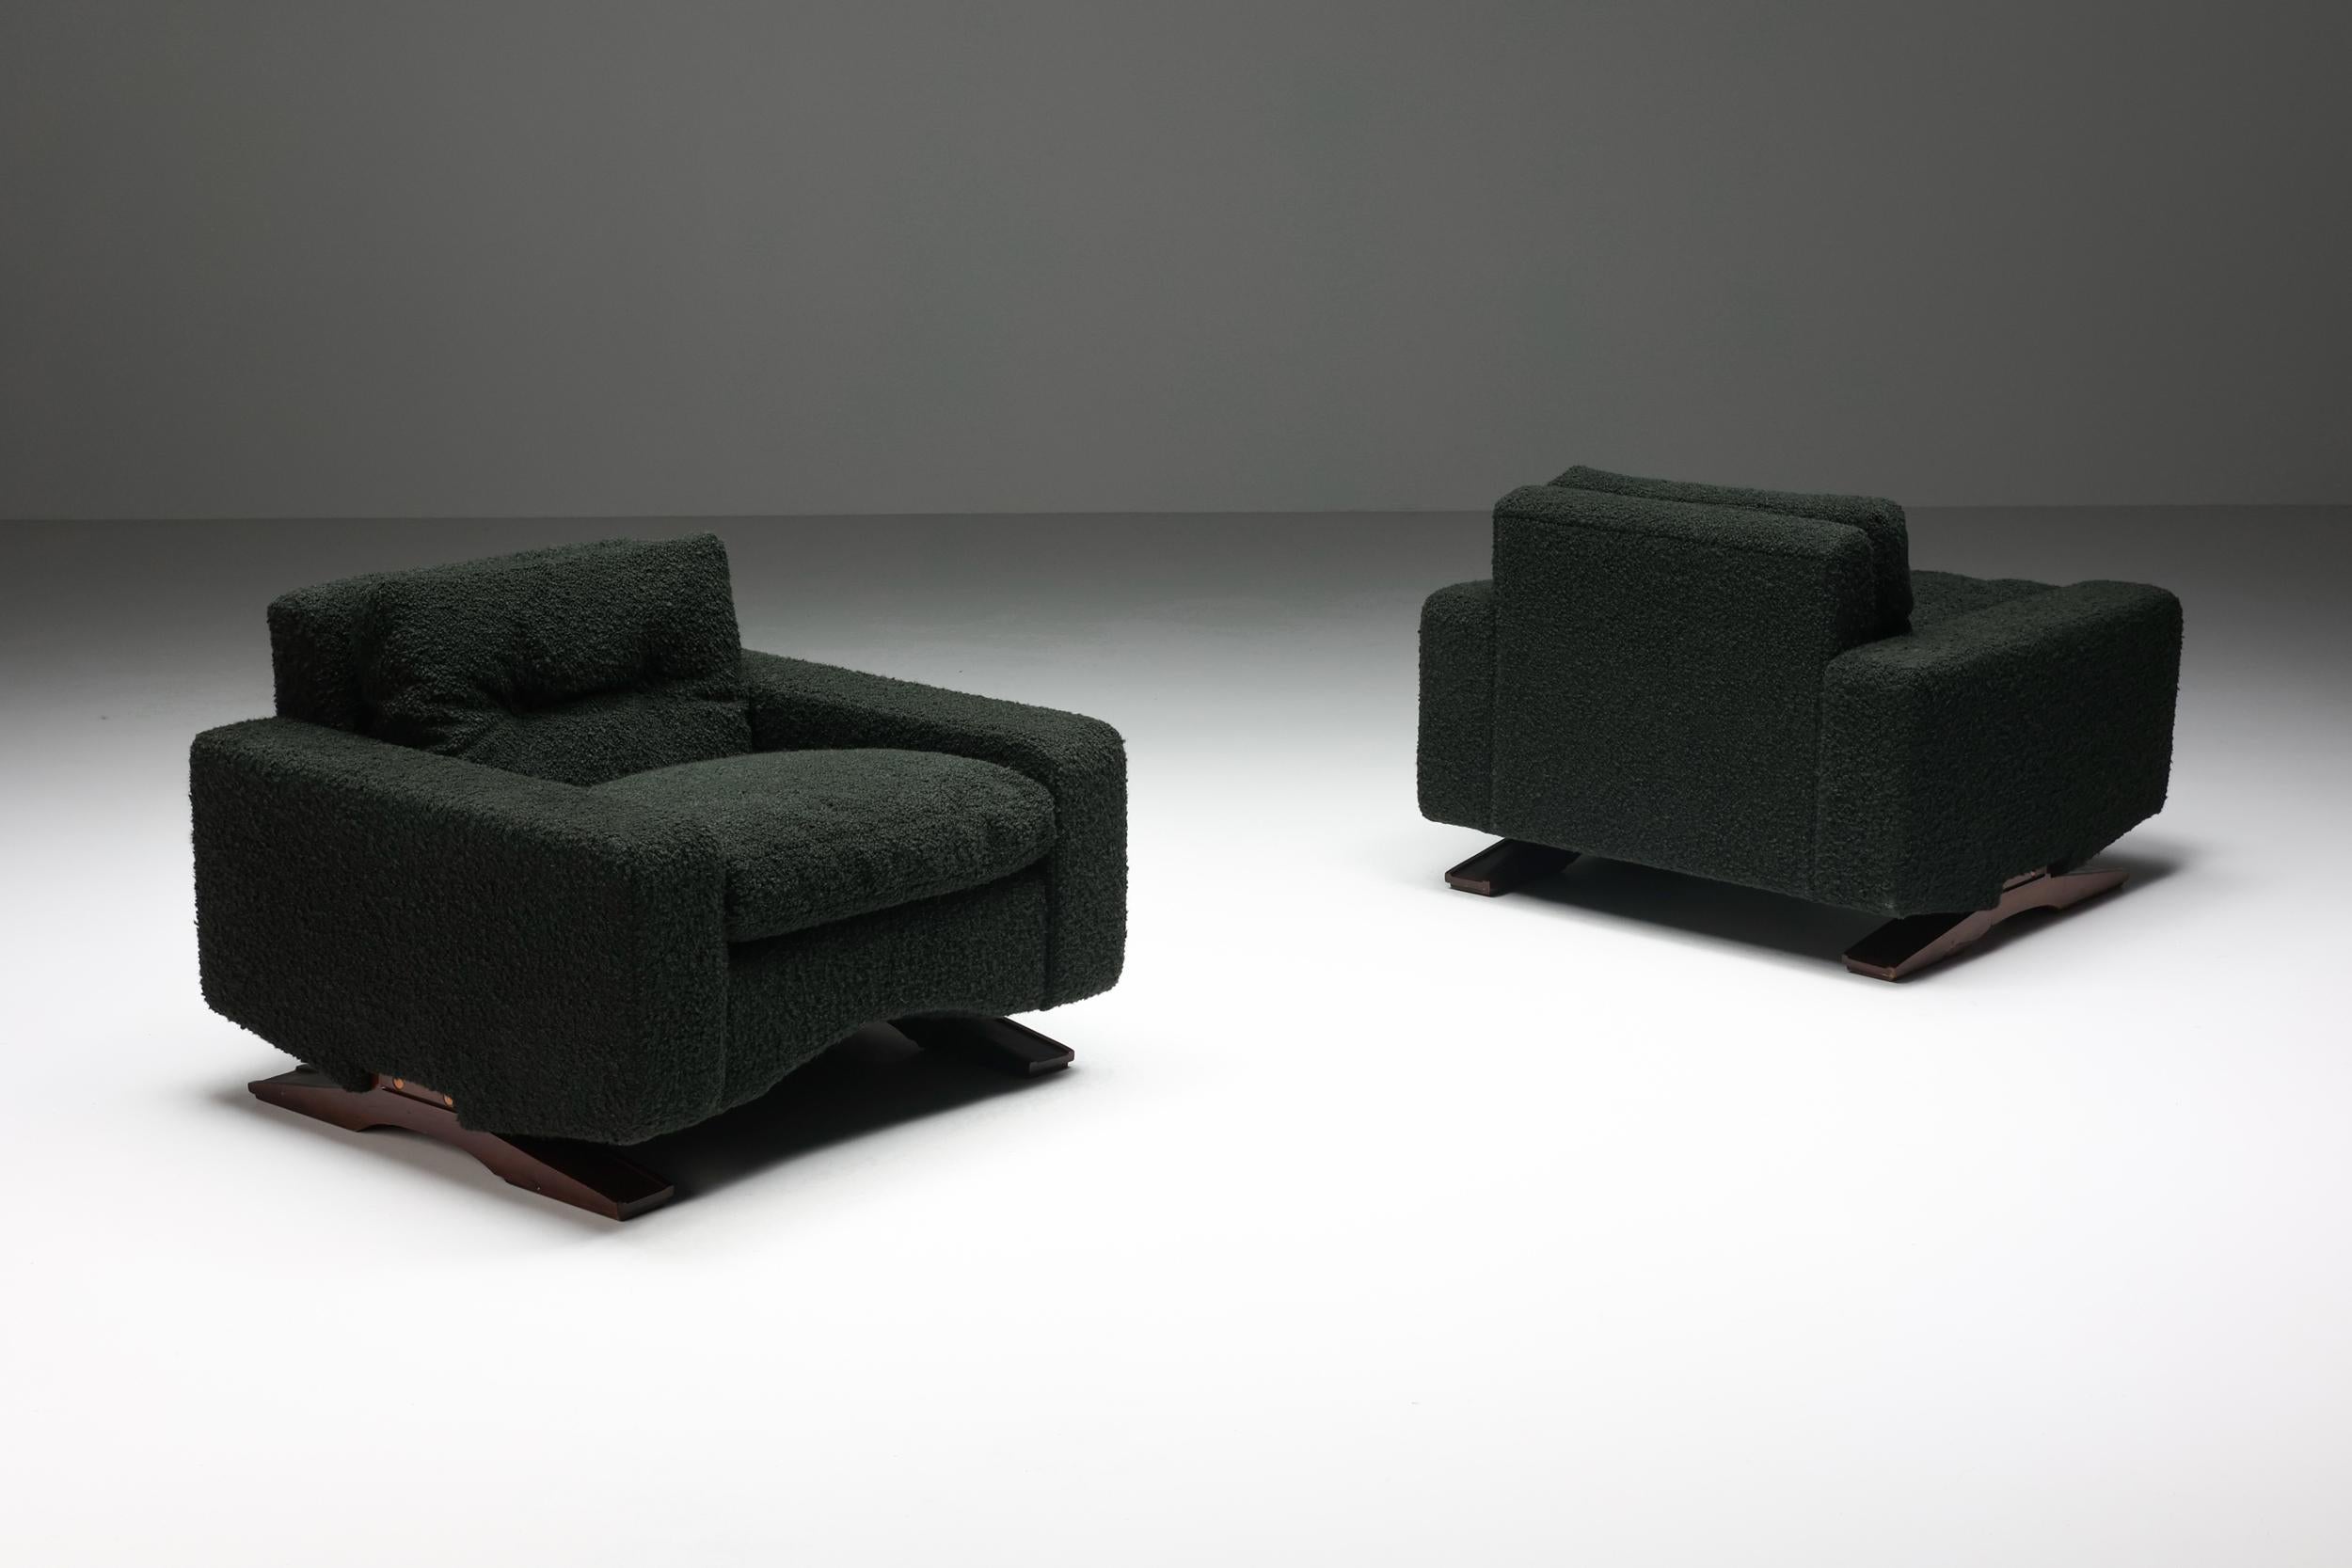 Franz Sartori for Flexform, pair of lounge chairs, boucle, wood, Italy, 1960s

Sturdy pair of lounge chairs in dark green boucle by the Italian sculptor Franz Sartori. These chairs feature a modern design due to the straight lines. The waved